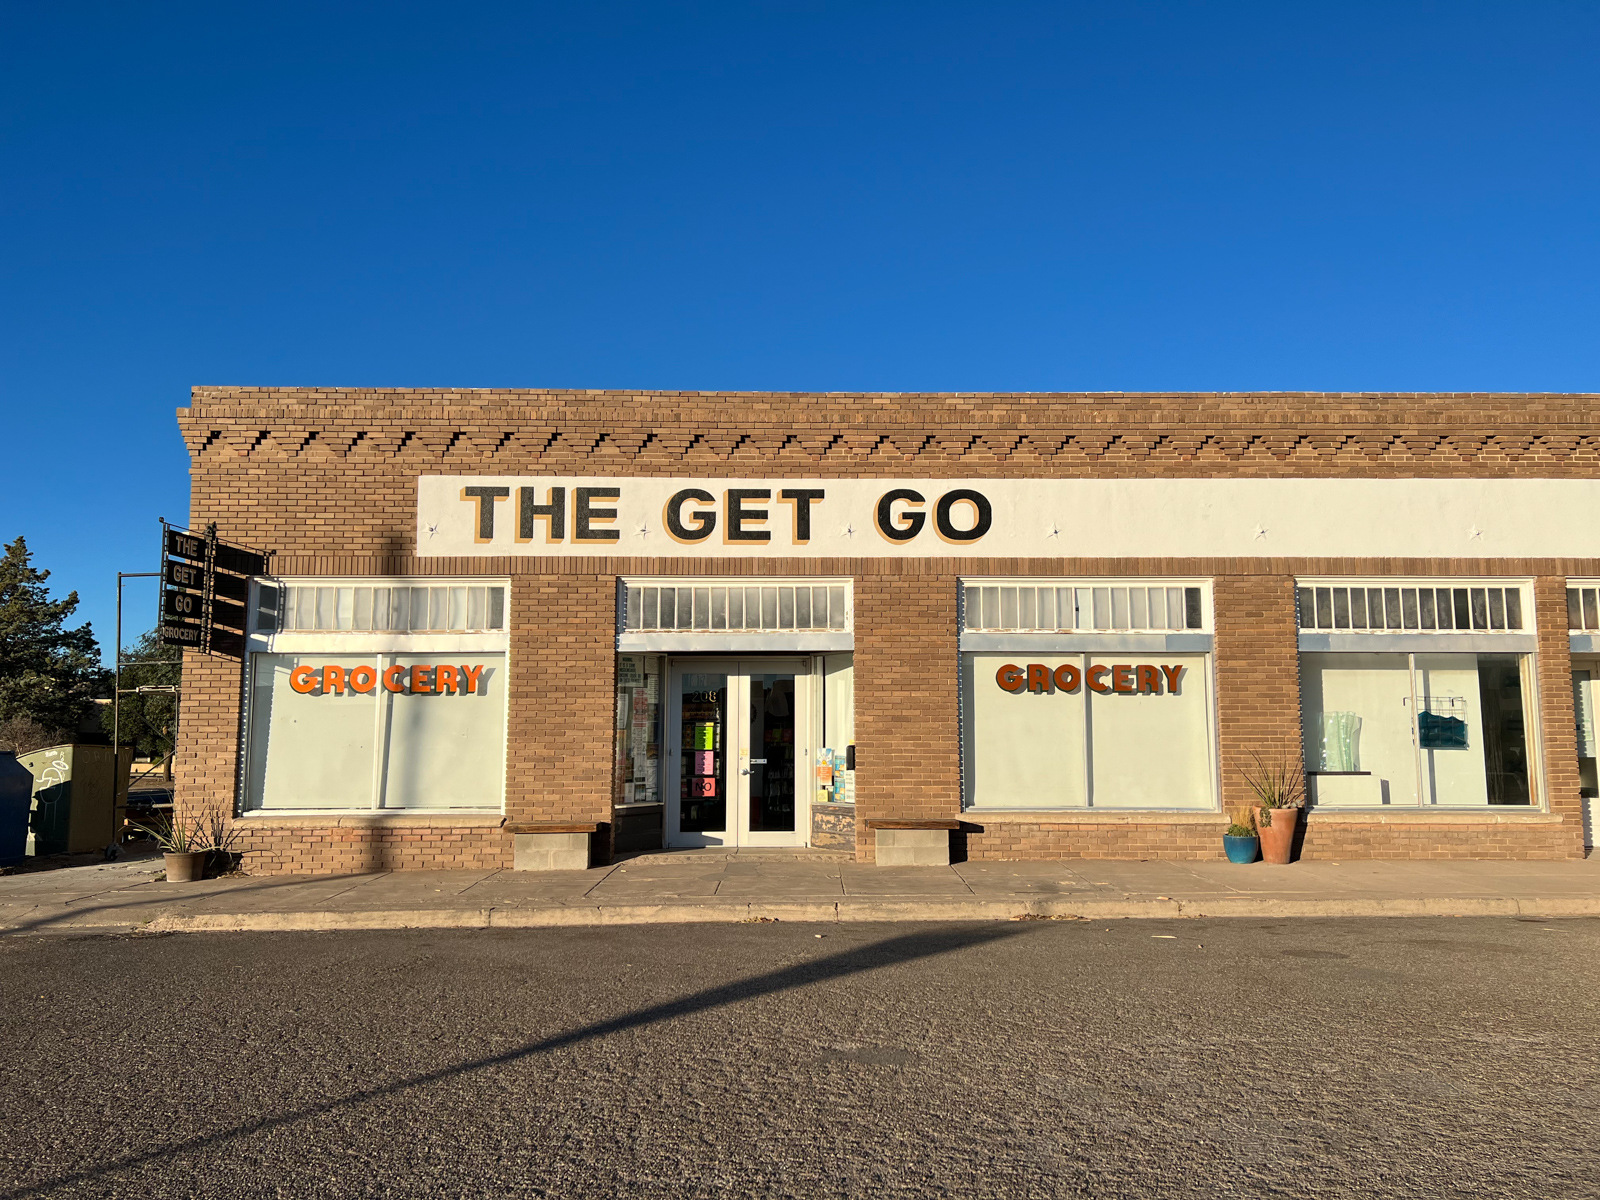 The Get Go grocery store in Marfa, Texas